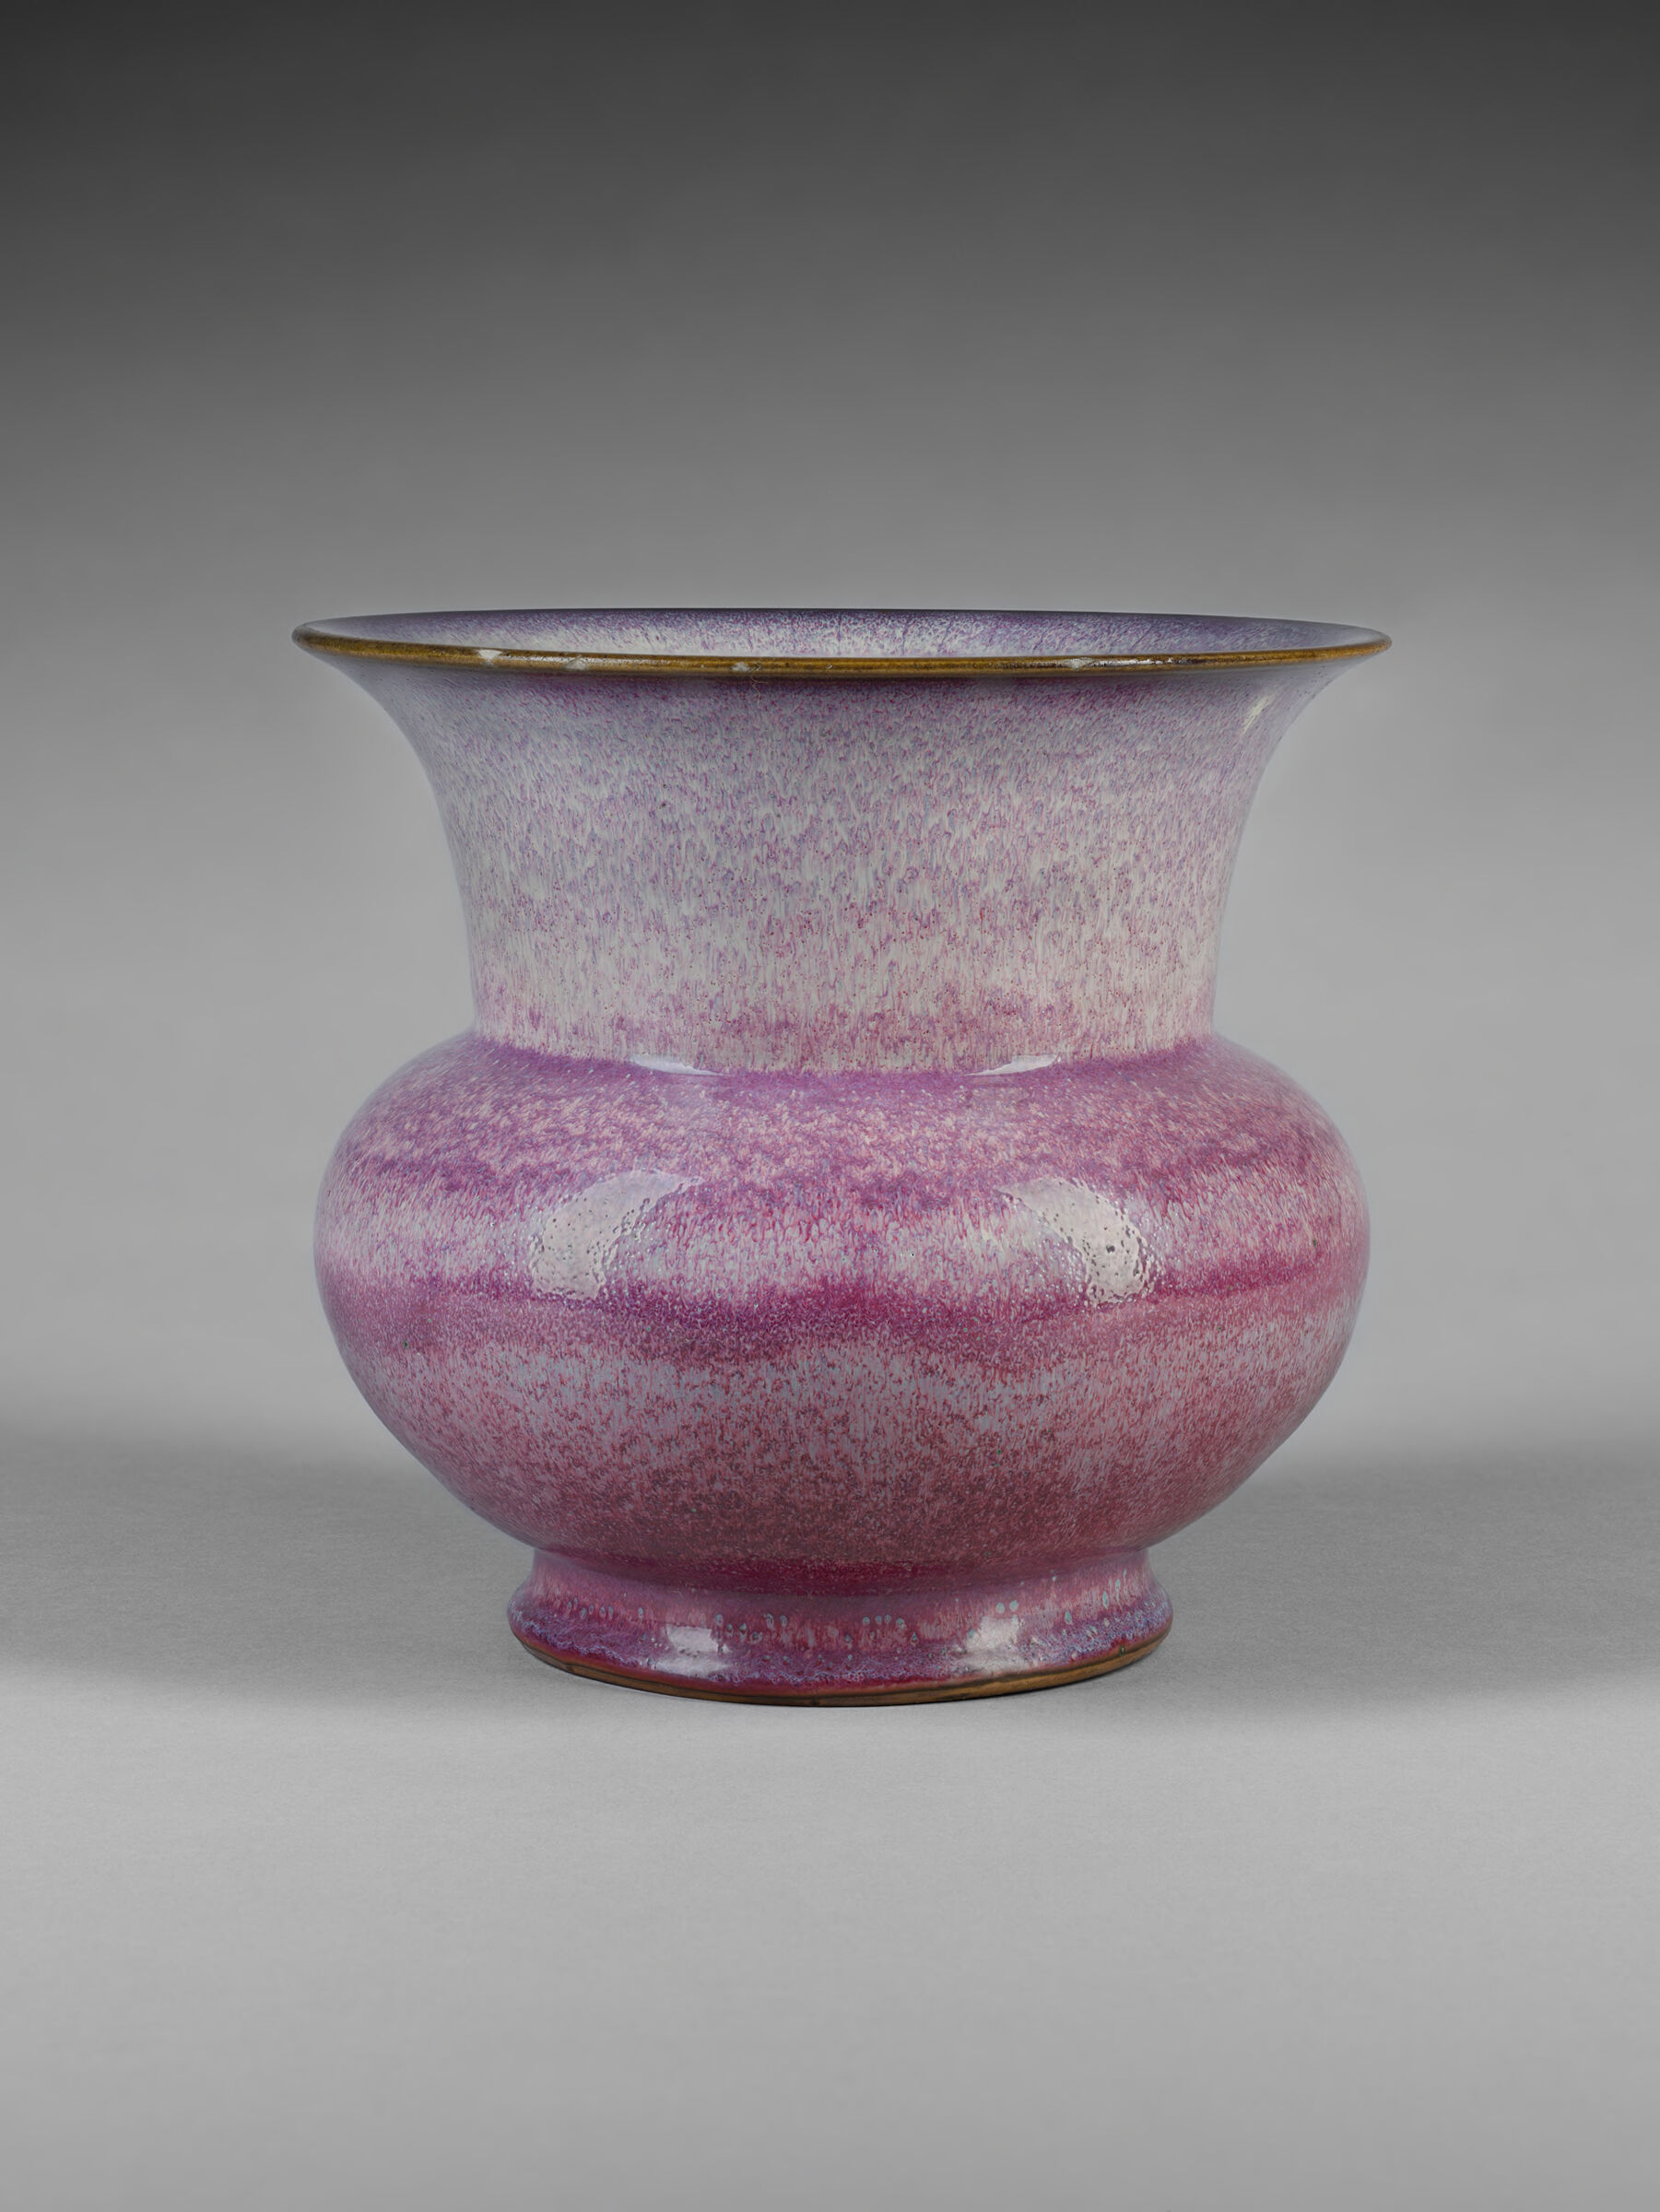 Zhadou-Shaped Flowerpot With Globular Body And Flaring Mouth